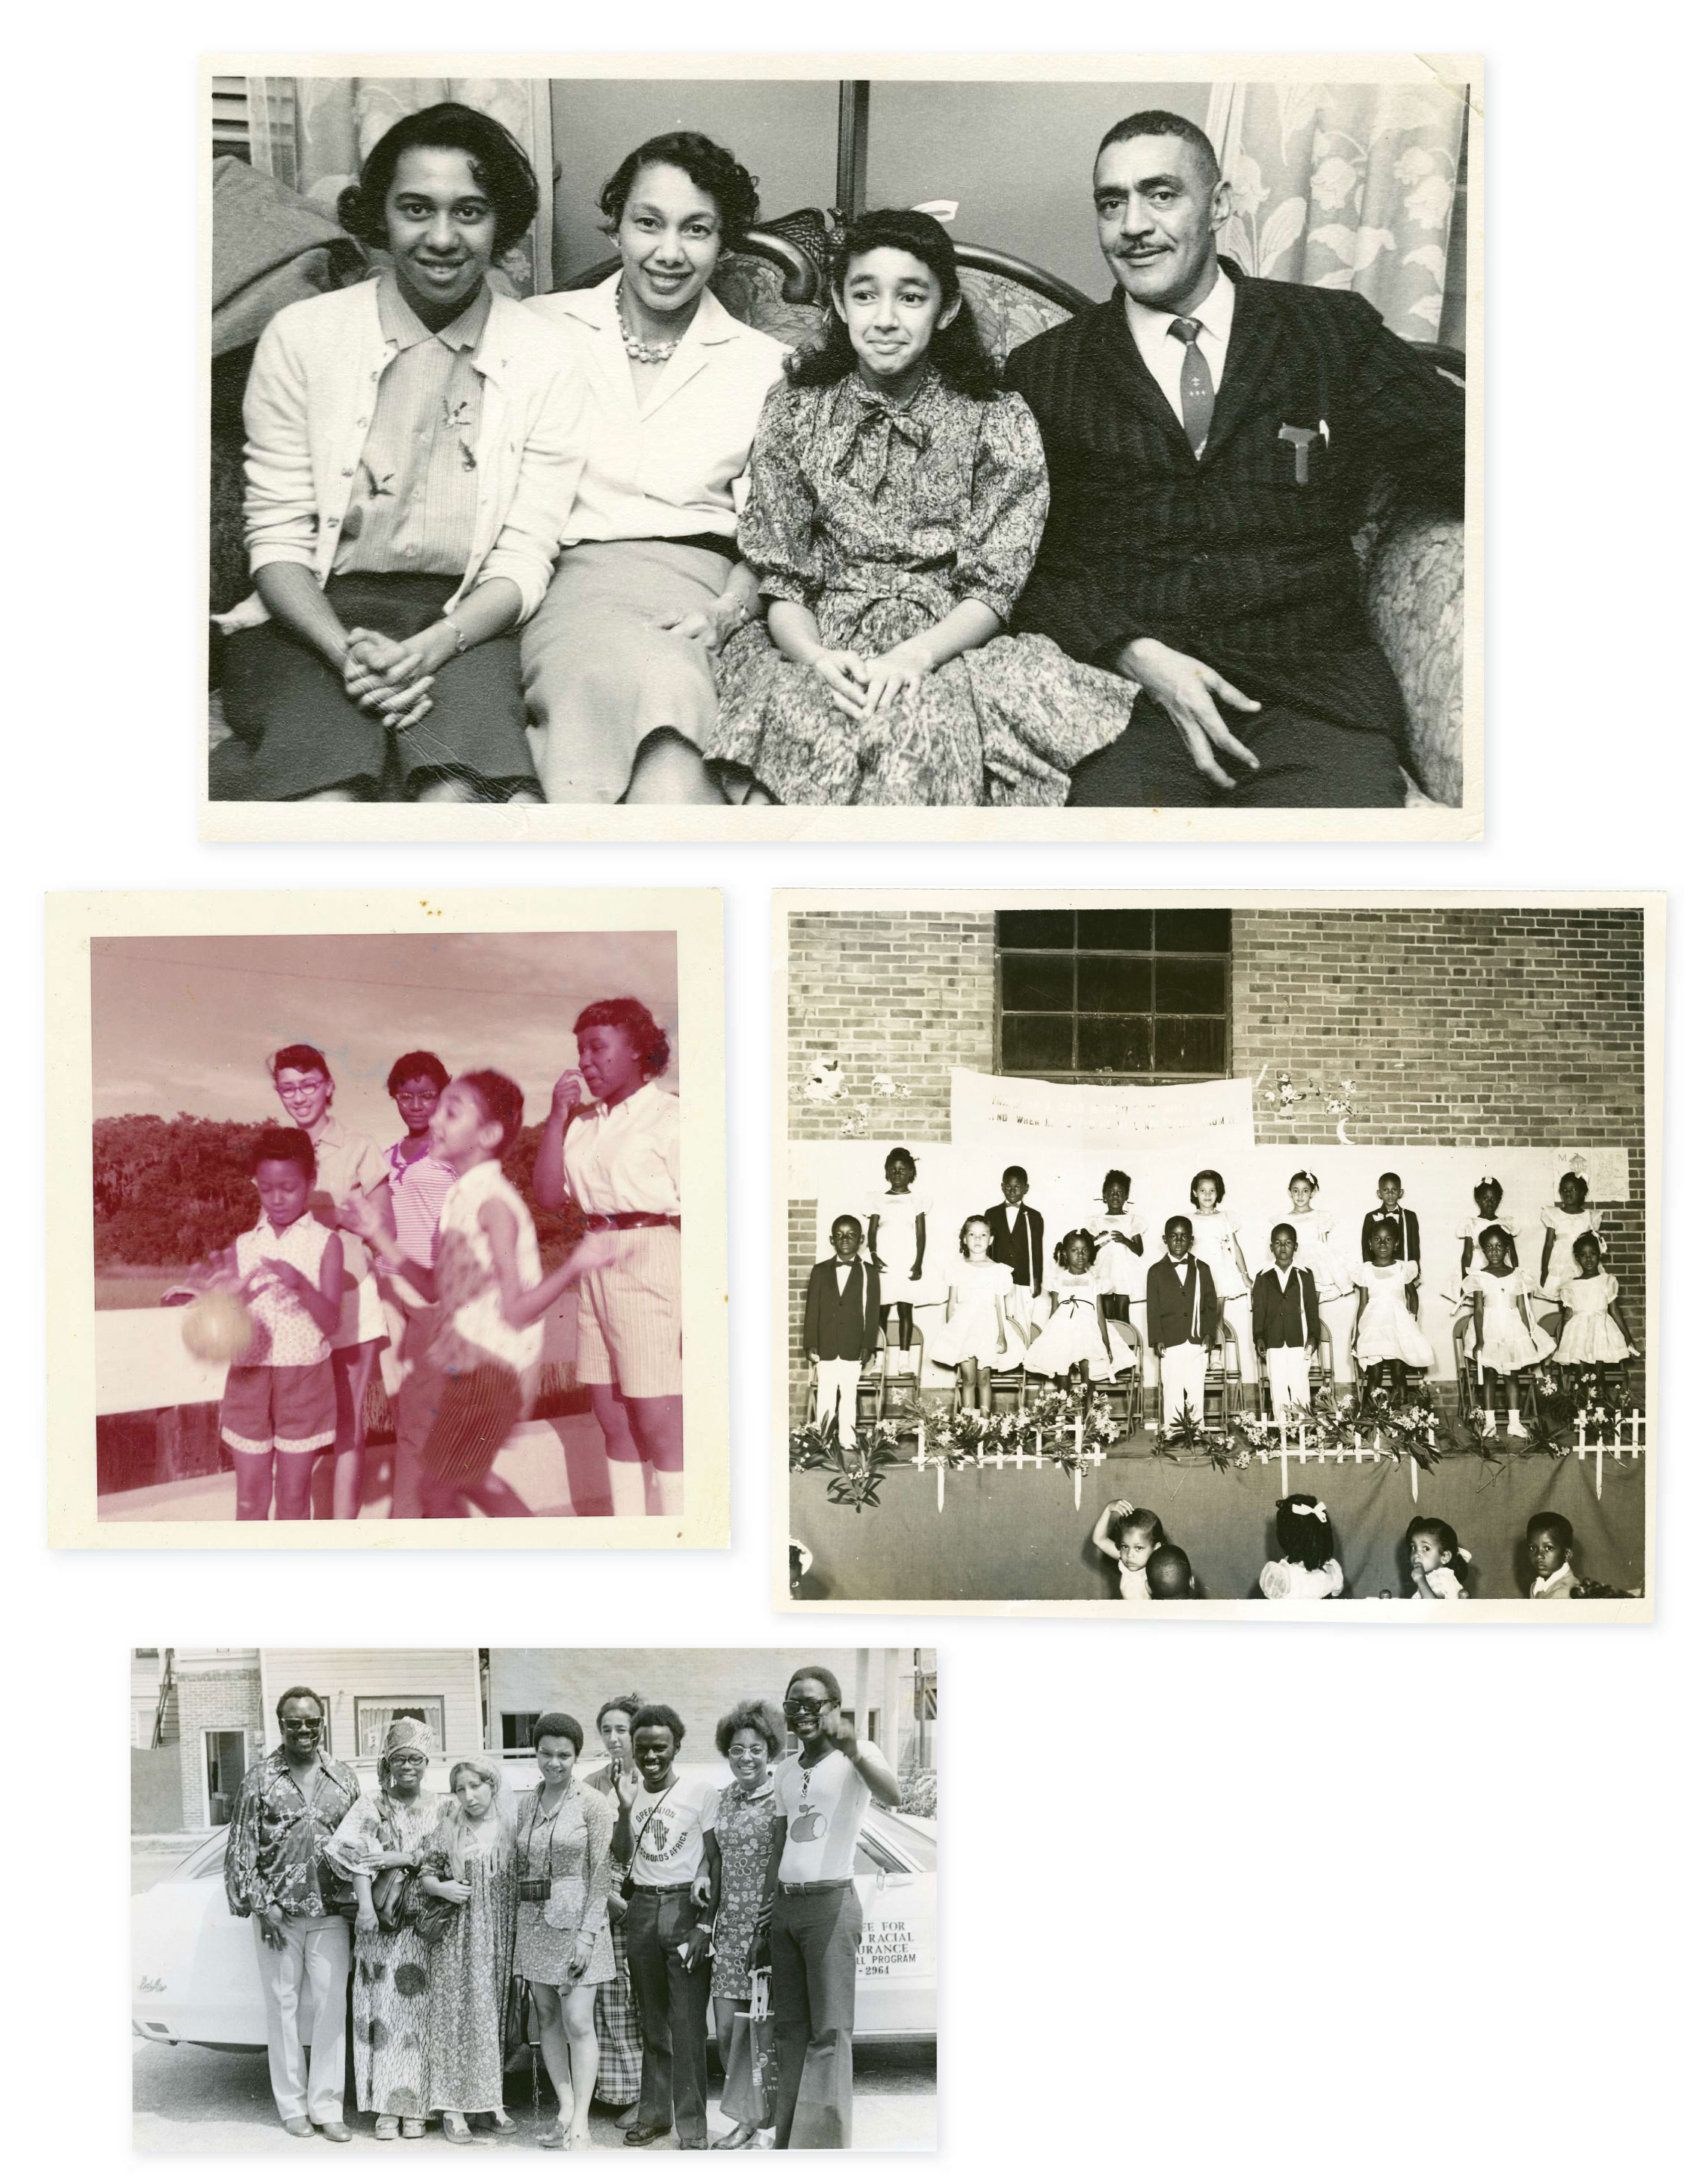 Family Ties: The Browns lived amid a vibrant black middle-class neighborhood on the peninsula. “There were black doctors, lawyers, business owners, well-to-do people and poor, too, but it was an intact community,” says Millicent. (Clockwise from top) With her parents, MaeDe and J. Arthur, and sister Minerva, the original plaintiff in the school suit; at an A. B. Rhett School program in 1954; working with Operation Crossroads Africa in the 1970s (the program was sponsored by the State Department to expose Africans to Lowcountry culture); with older sister Joenelle (far left, back) circa 1957 at a black-owned resort in the Catskill Mountains frequented by the Brown family